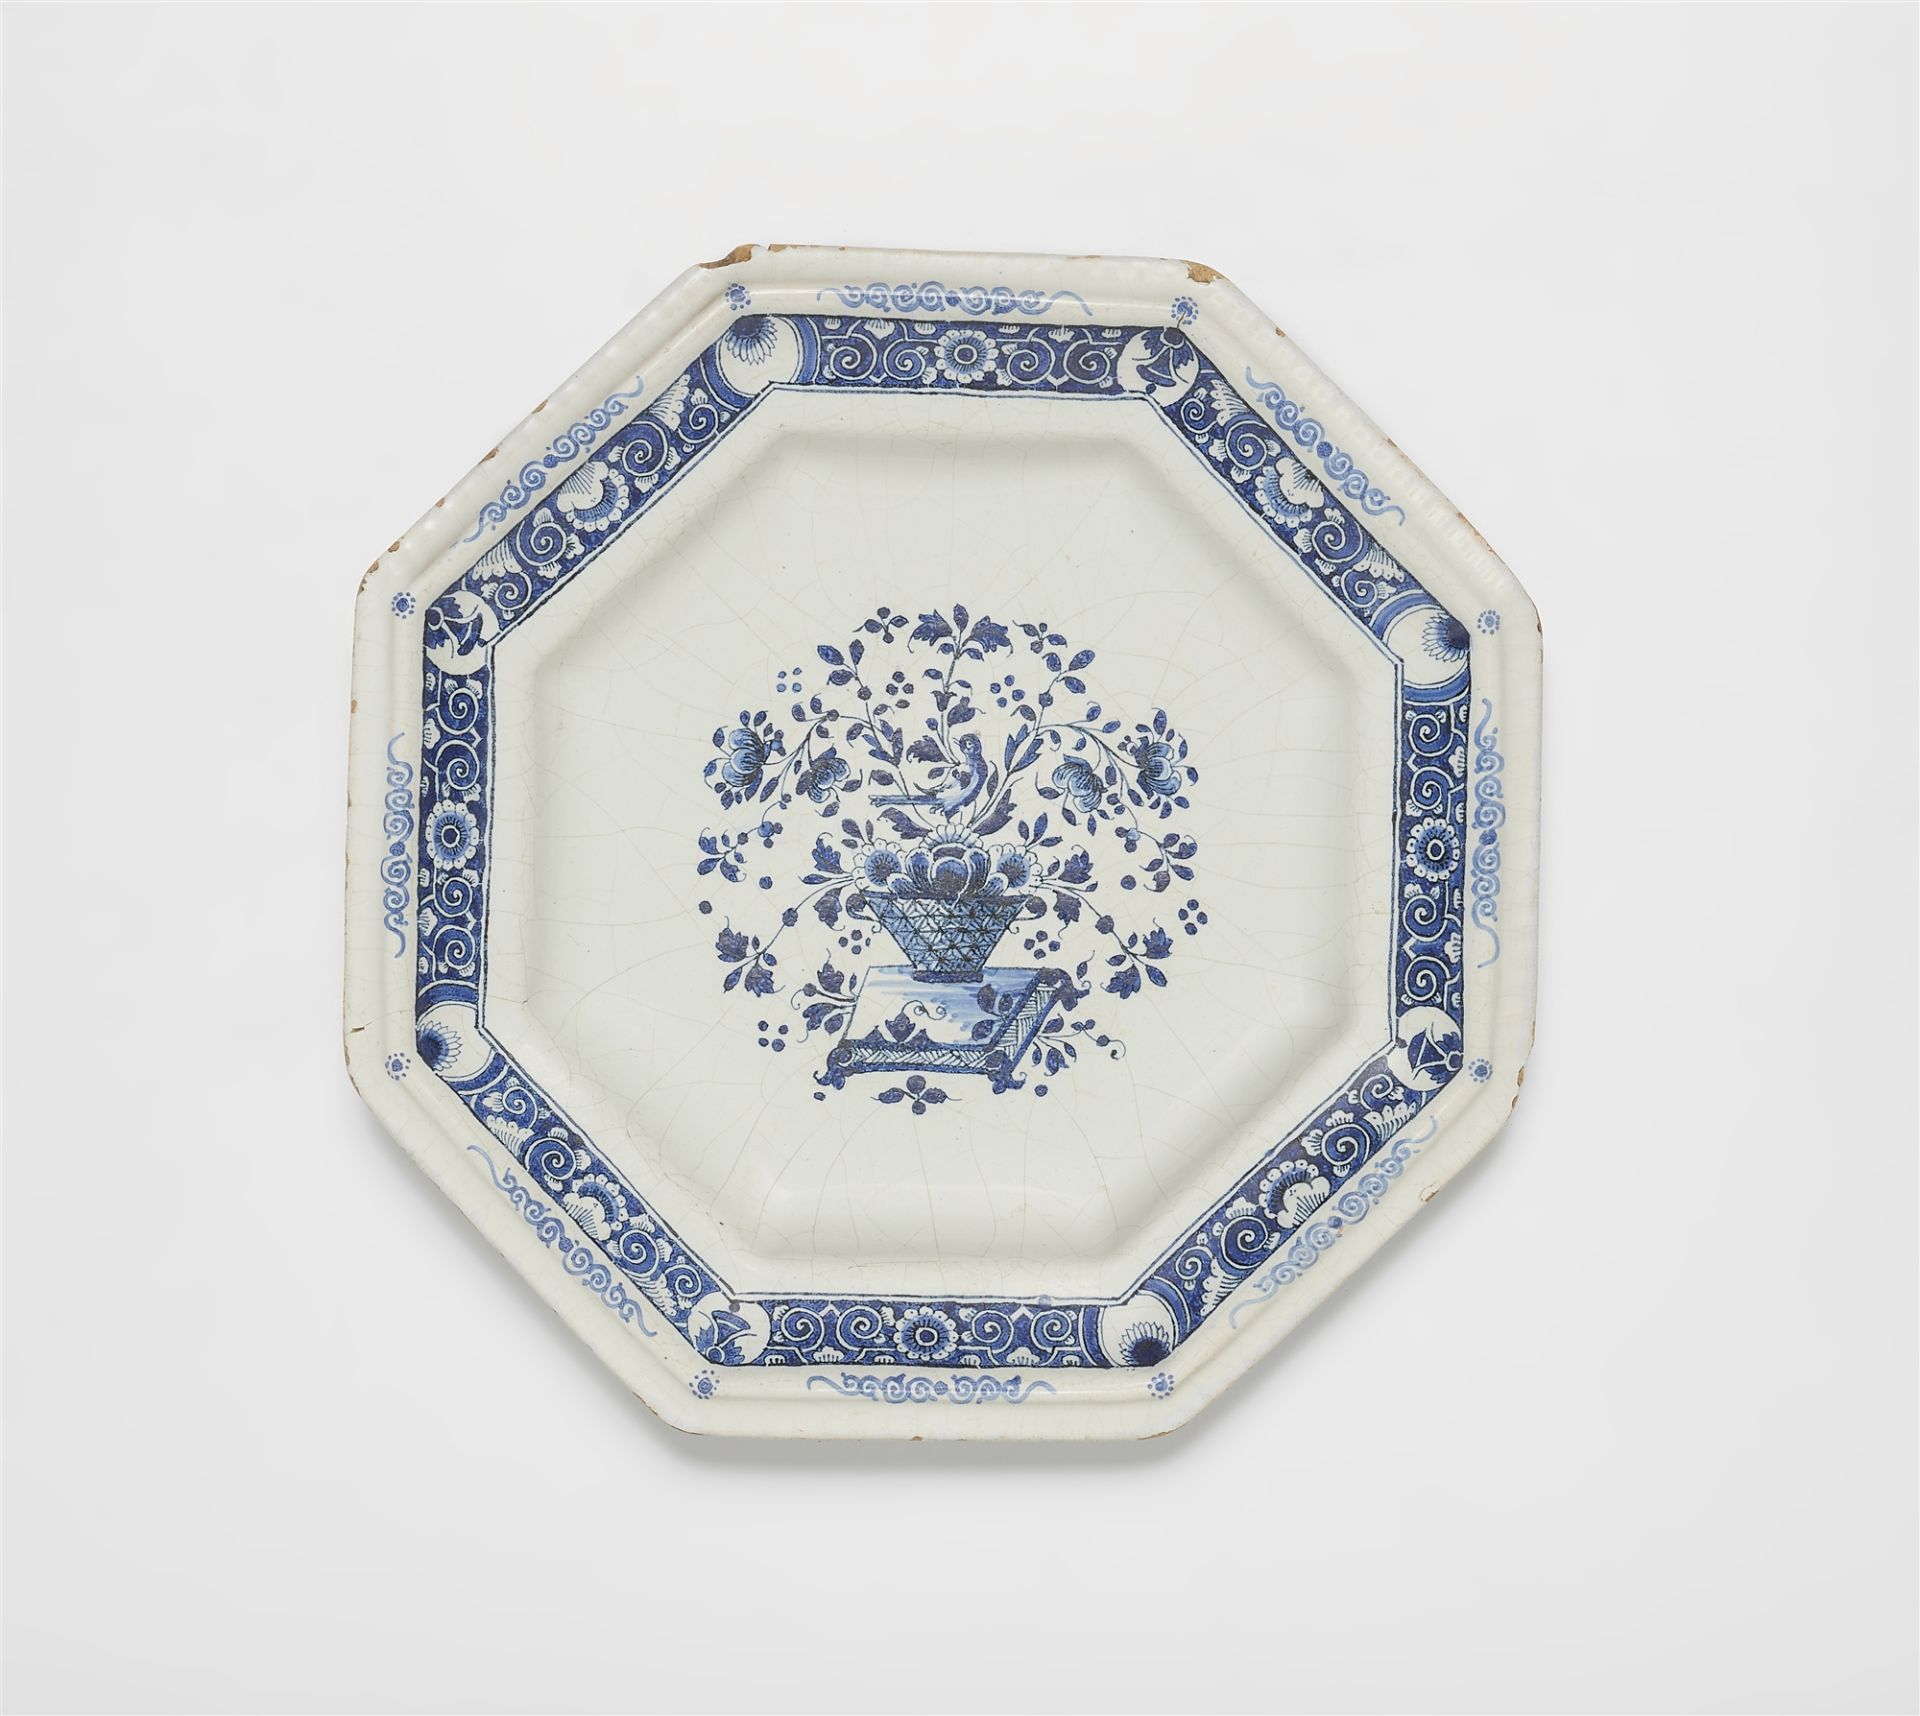 An octagonal Strasbourg faience dish with lambrequin decor